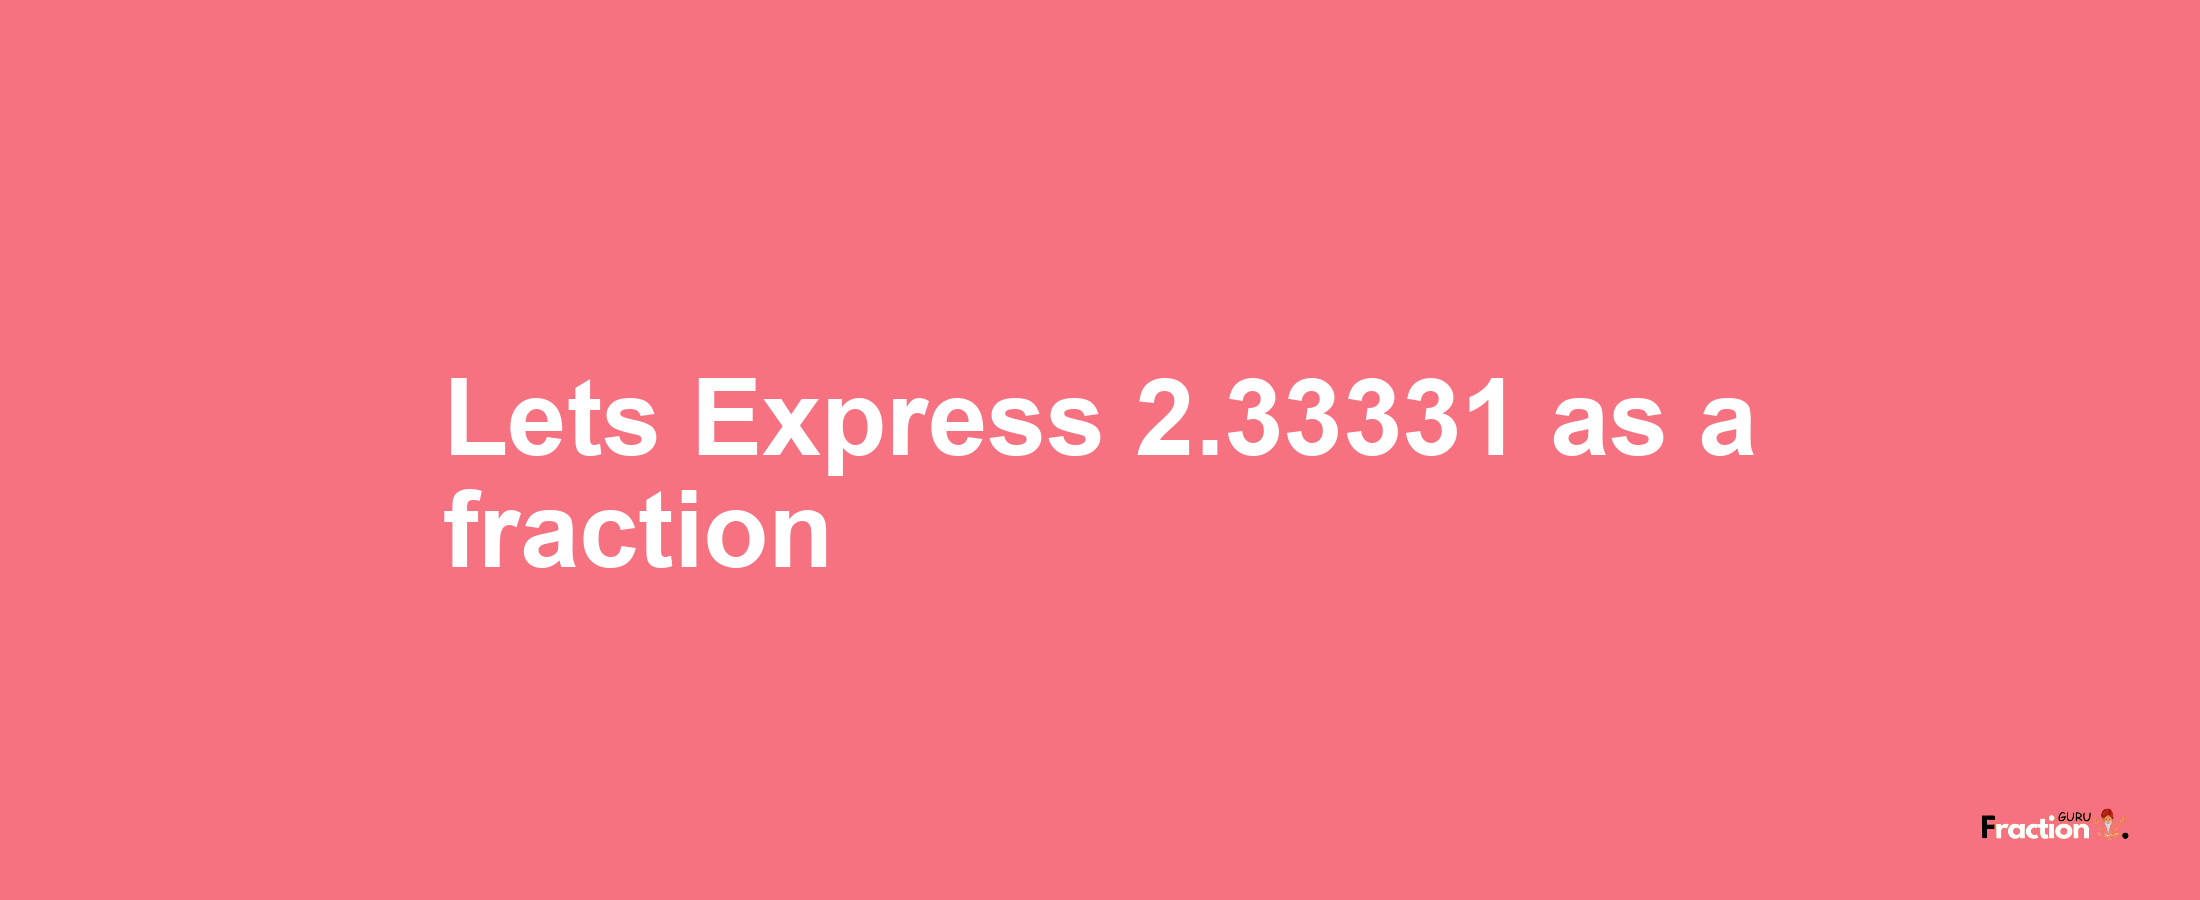 Lets Express 2.33331 as afraction